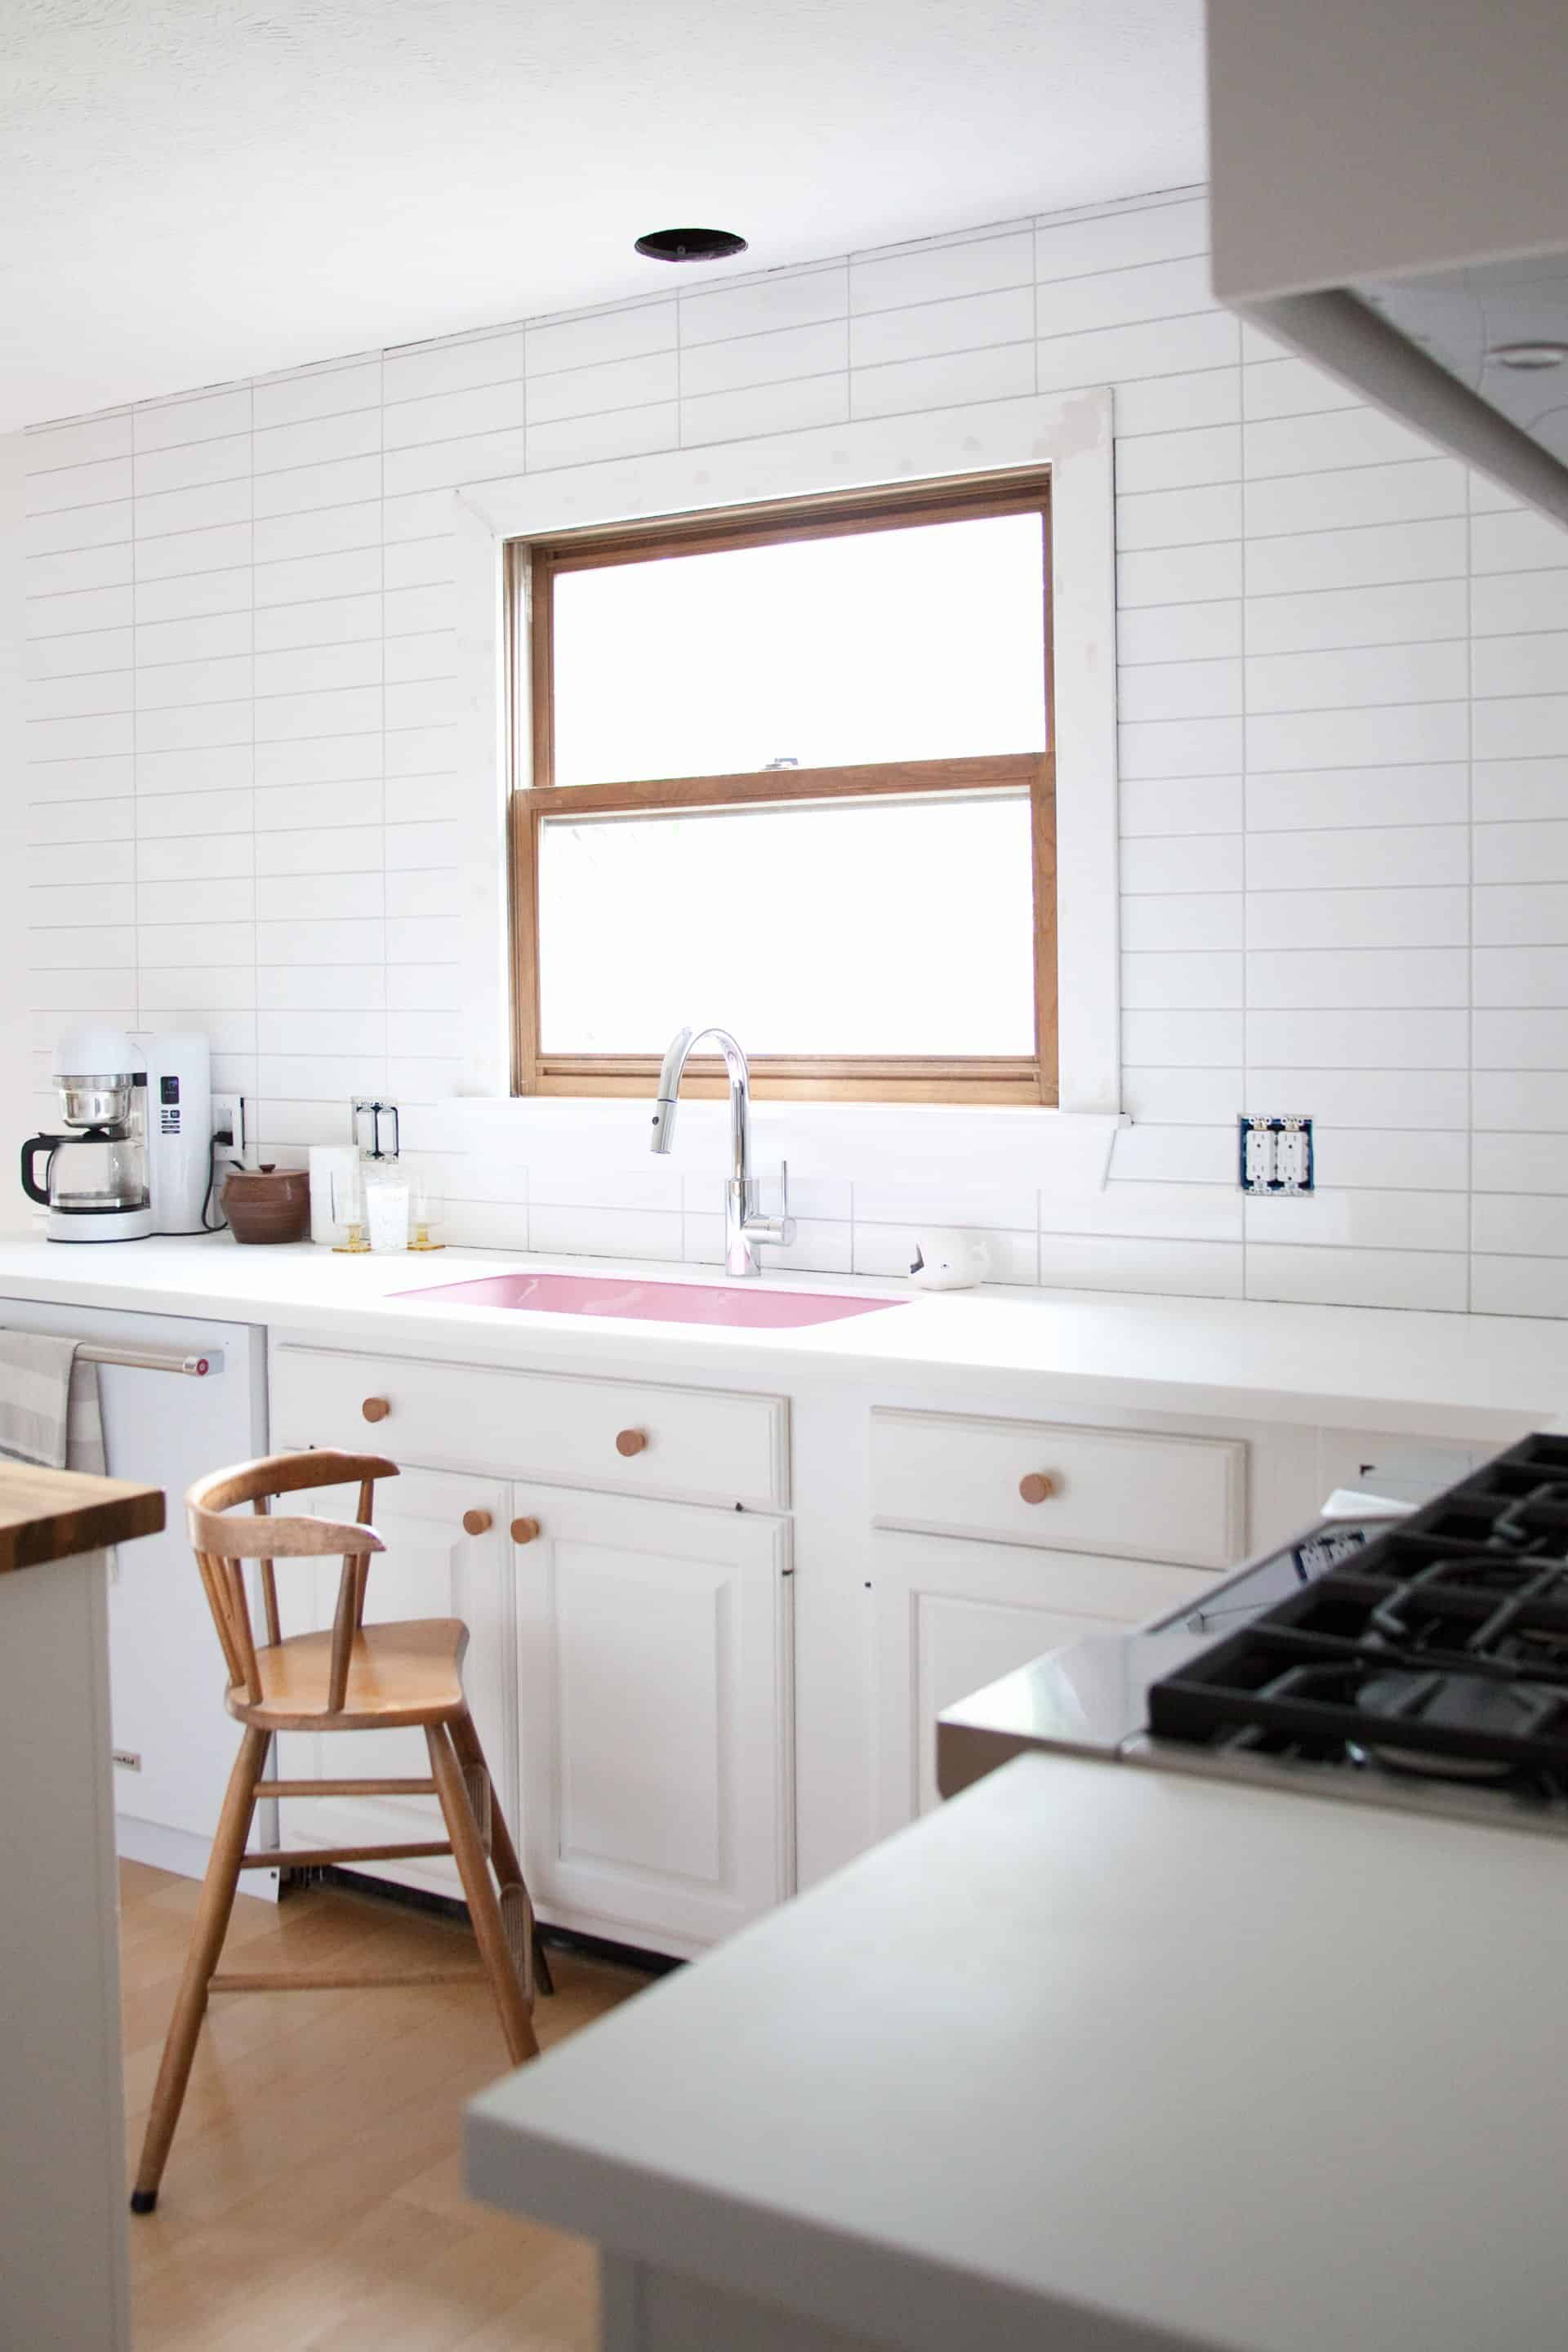 a kitchen with white cabinets with wooden handles, white countertops, and white tile with a stool in front of the sink